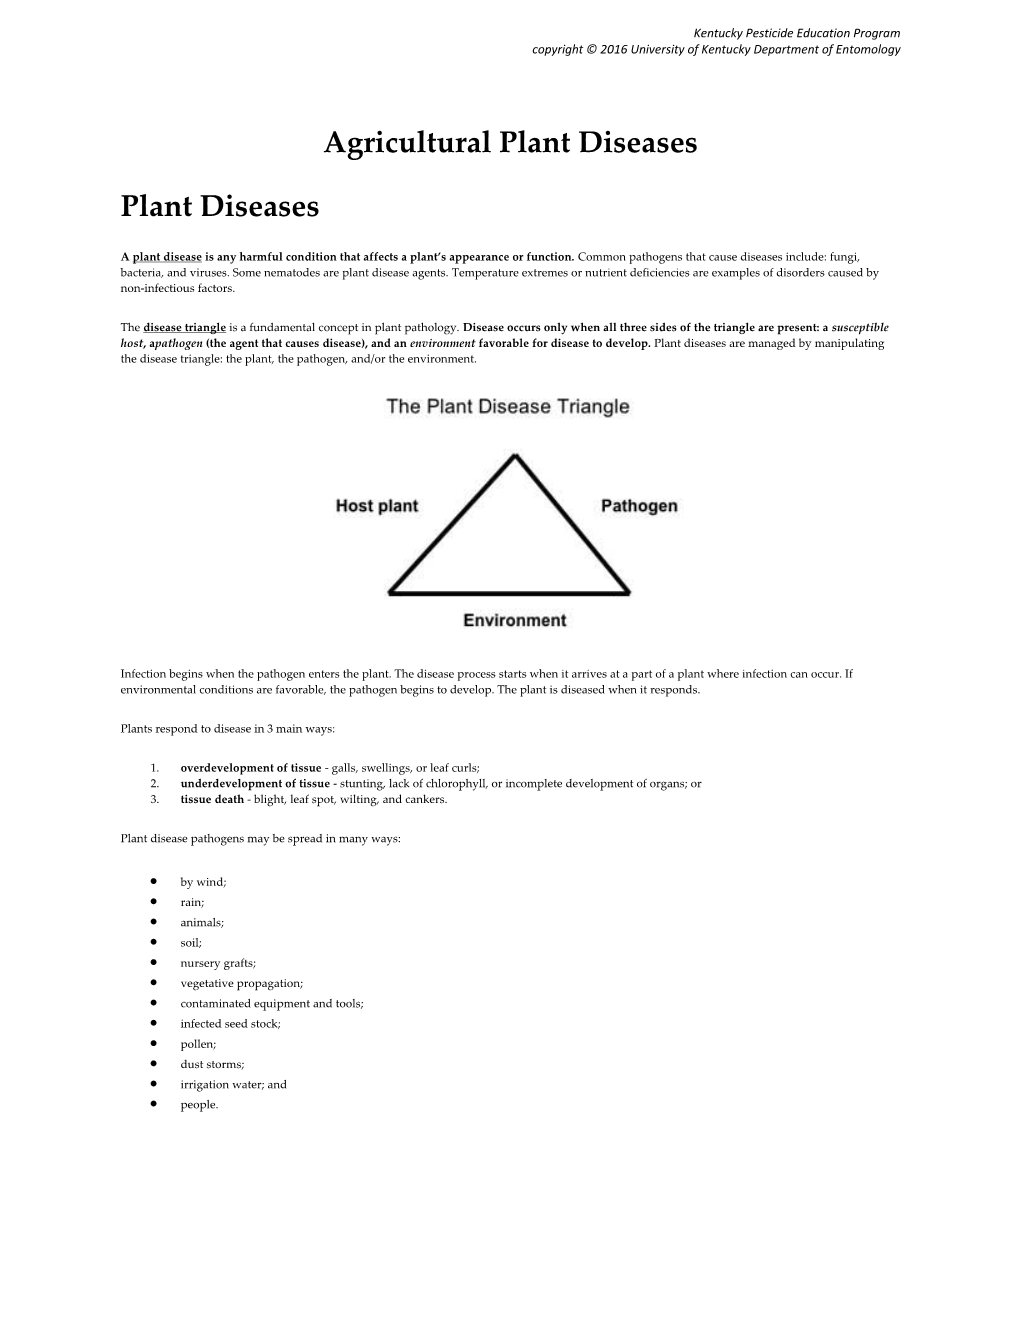 Diagnosis of Plant Diseases